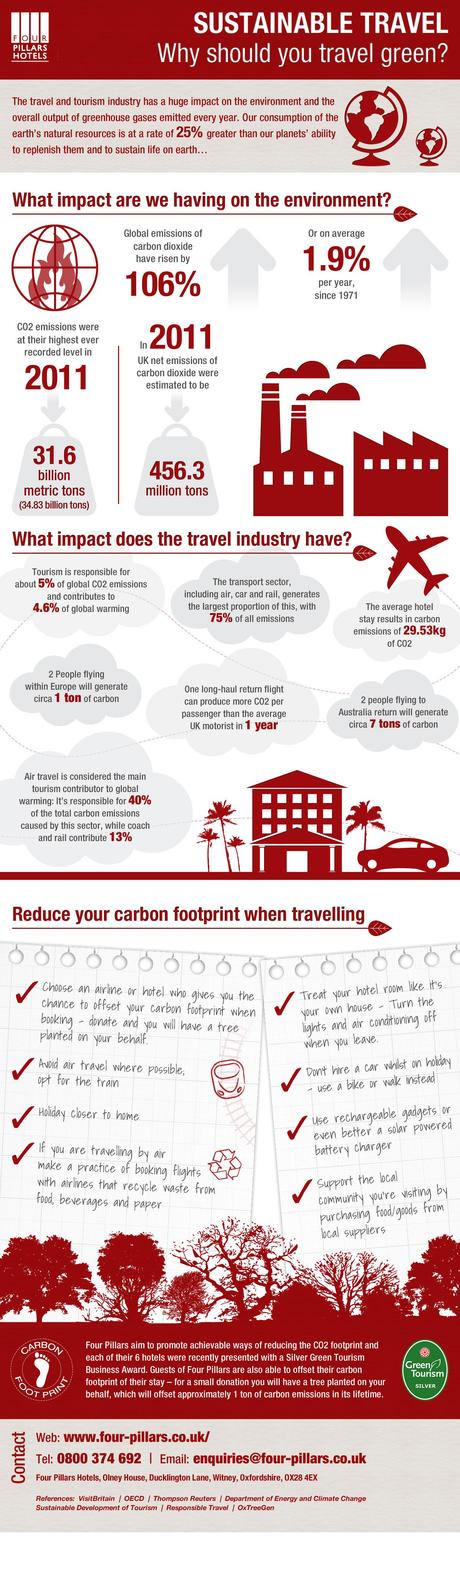 Infographic on Green Travel